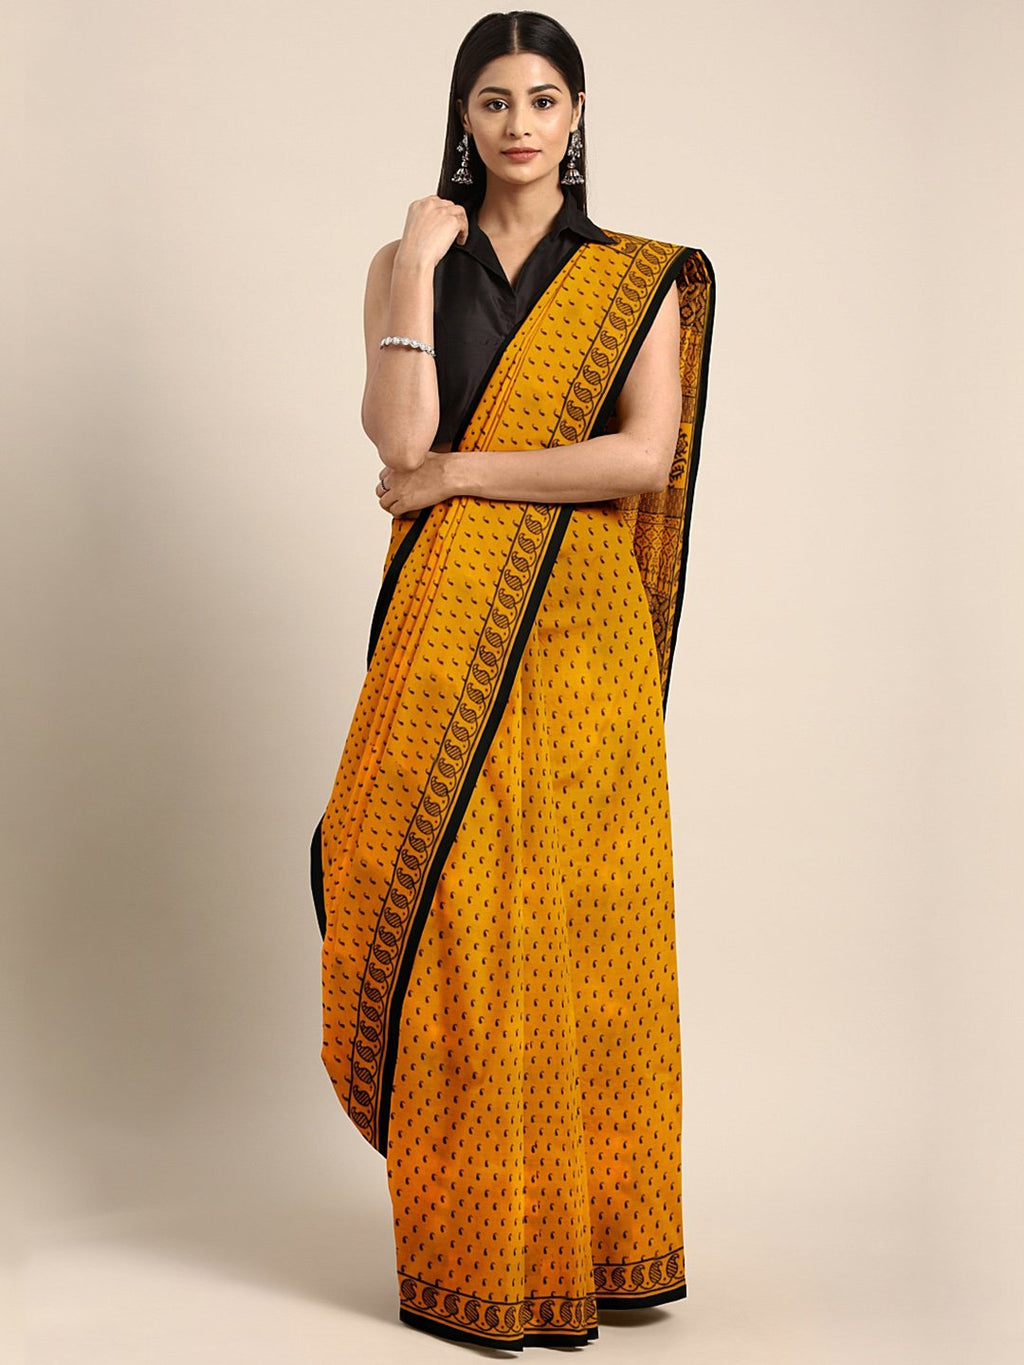 Mustard Yellow Black Bagh Handblock Print Saree-Saree-Kalakari India-MYBASA0017-Bagh, Cotton, Geographical Indication, Hand Blocks, Hand Crafted, Heritage Prints, Natural Dyes, Sarees, Sustainable Fabrics-[Linen,Ethnic,wear,Fashionista,Handloom,Handicraft,Indigo,blockprint,block,print,Cotton,Chanderi,Blue, latest,classy,party,bollywood,trendy,summer,style,traditional,formal,elegant,unique,style,hand,block,print, dabu,booti,gift,present,glamorous,affordable,collectible,Sari,Saree,printed, holi, D